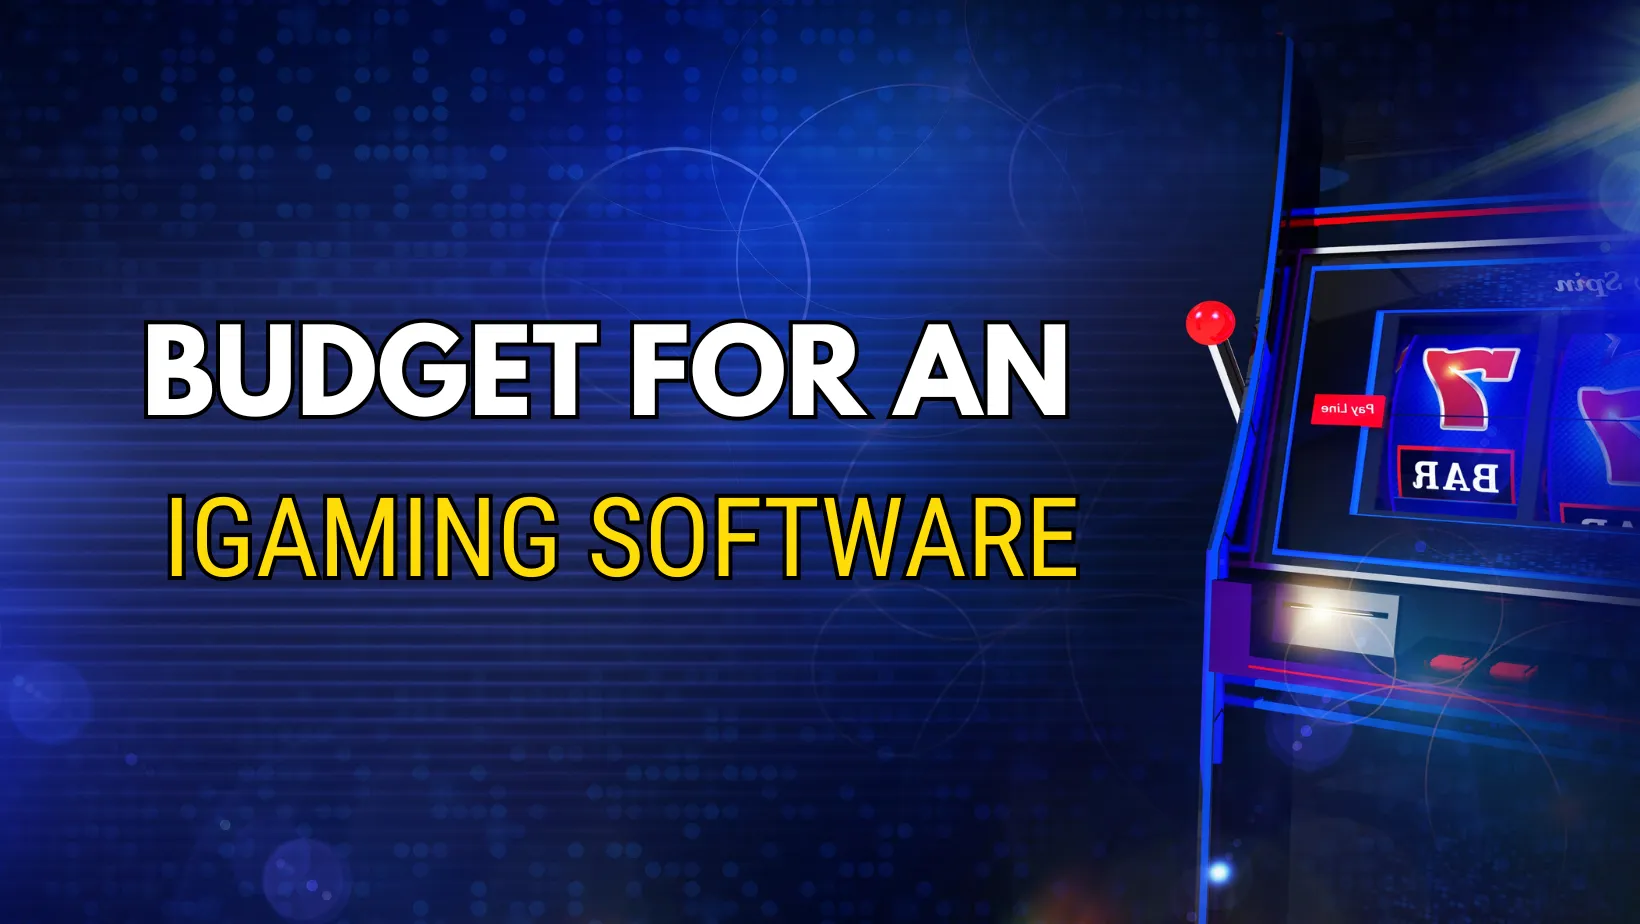 What Should Be Your Budget For An Igaming Software Development?